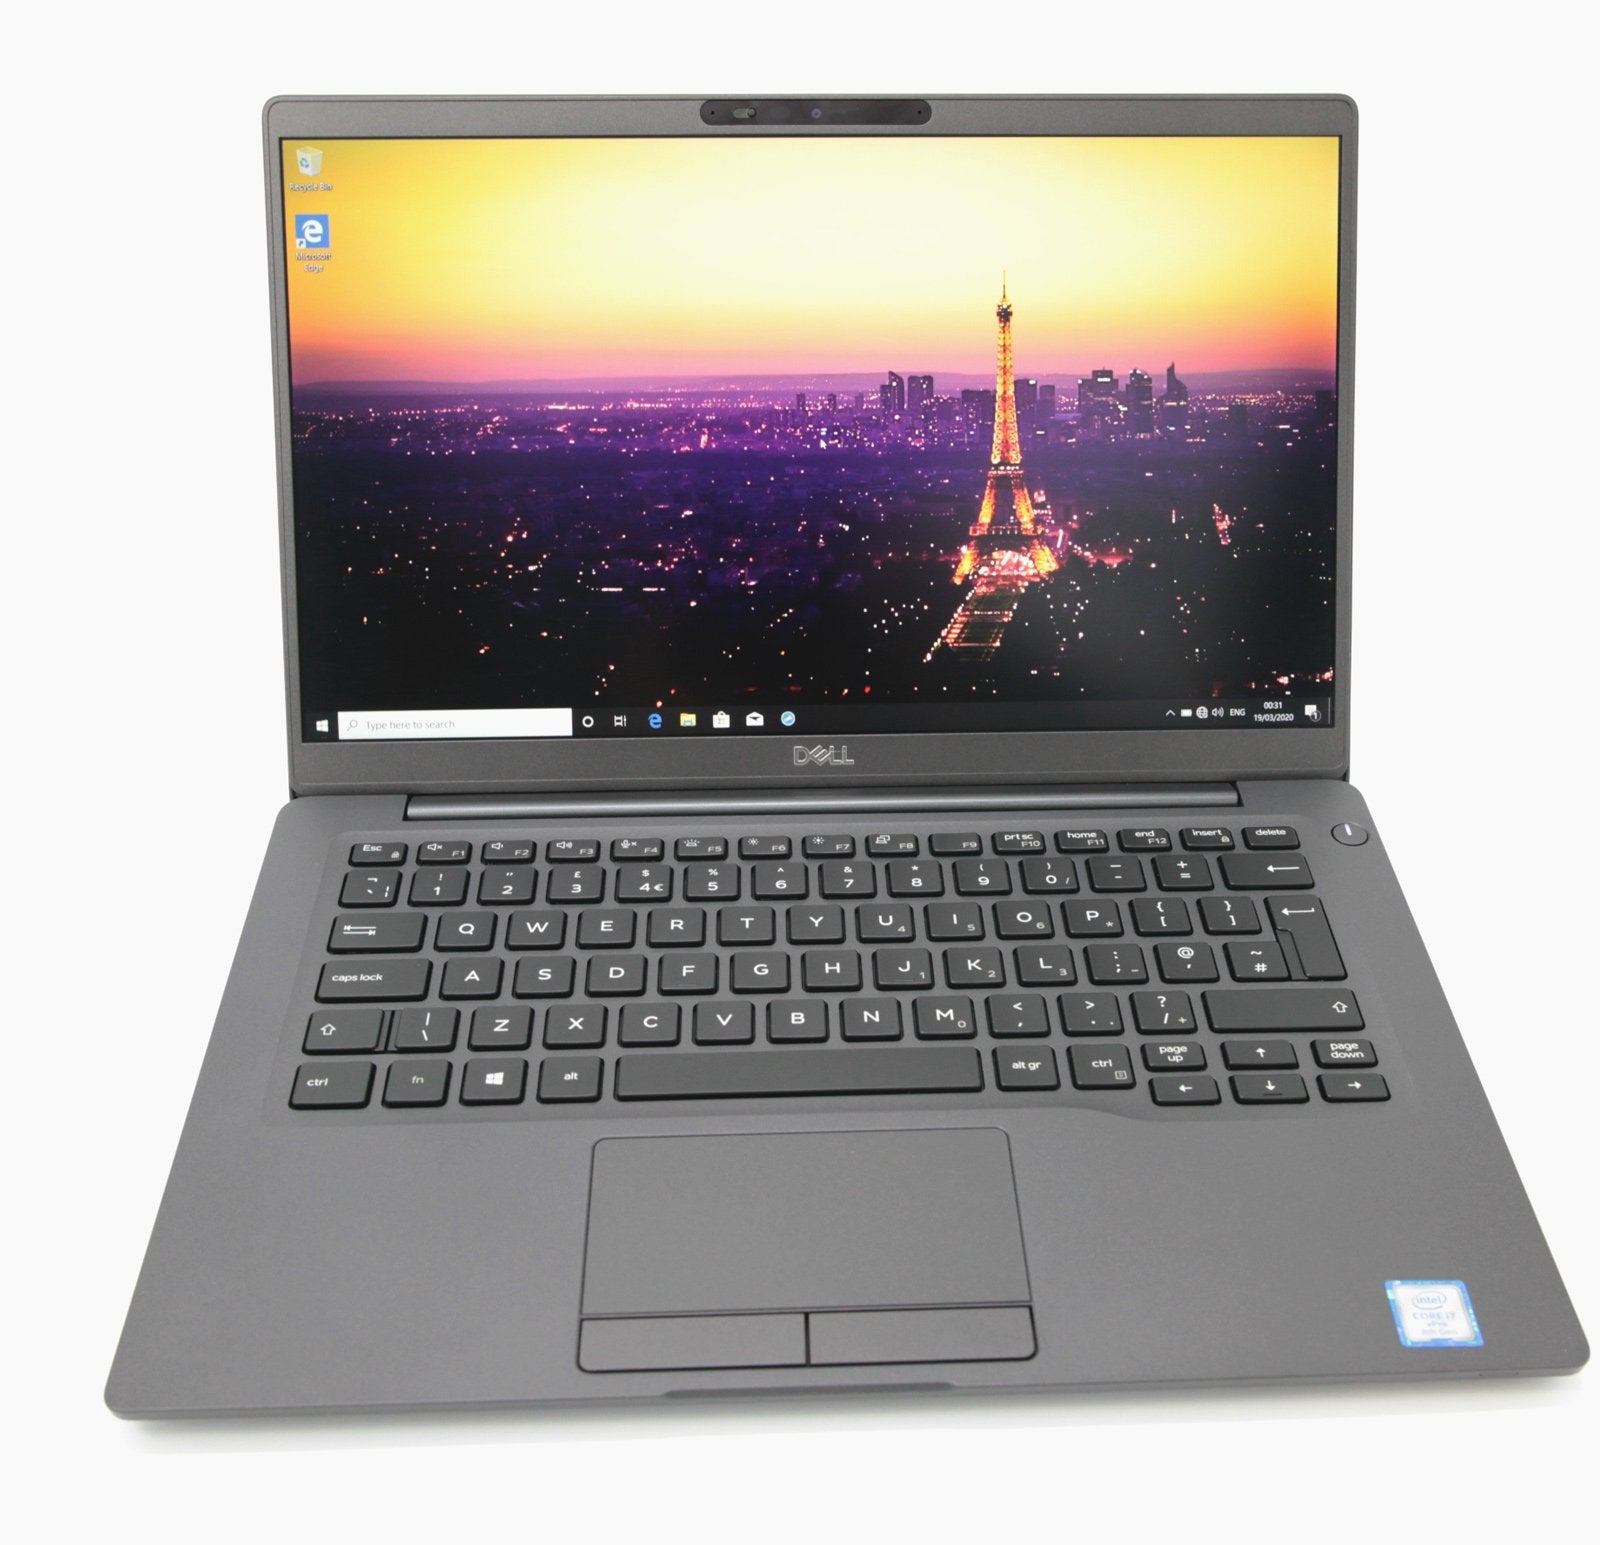 Dell Latitude 7400 14" Laptop (2019): Core i7 16GB RAM 256GB 1.36Kg (After 7490) - CruiseTech